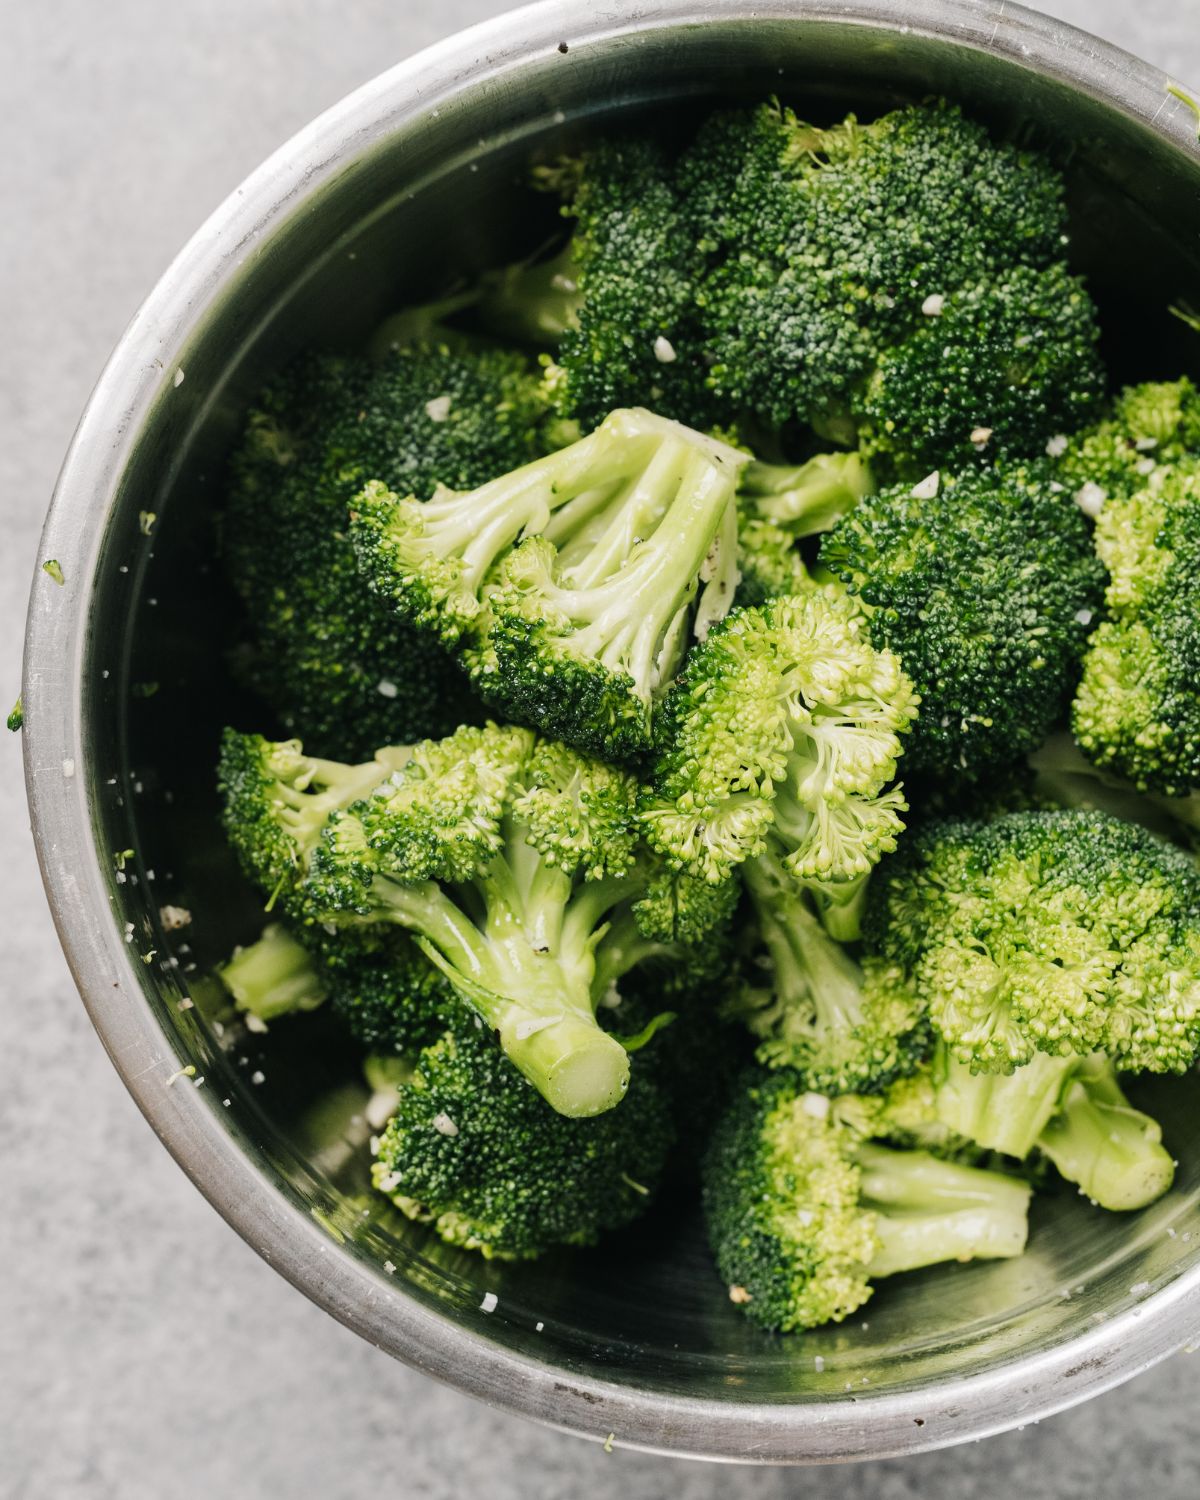 A bowl of cooked broccoli.